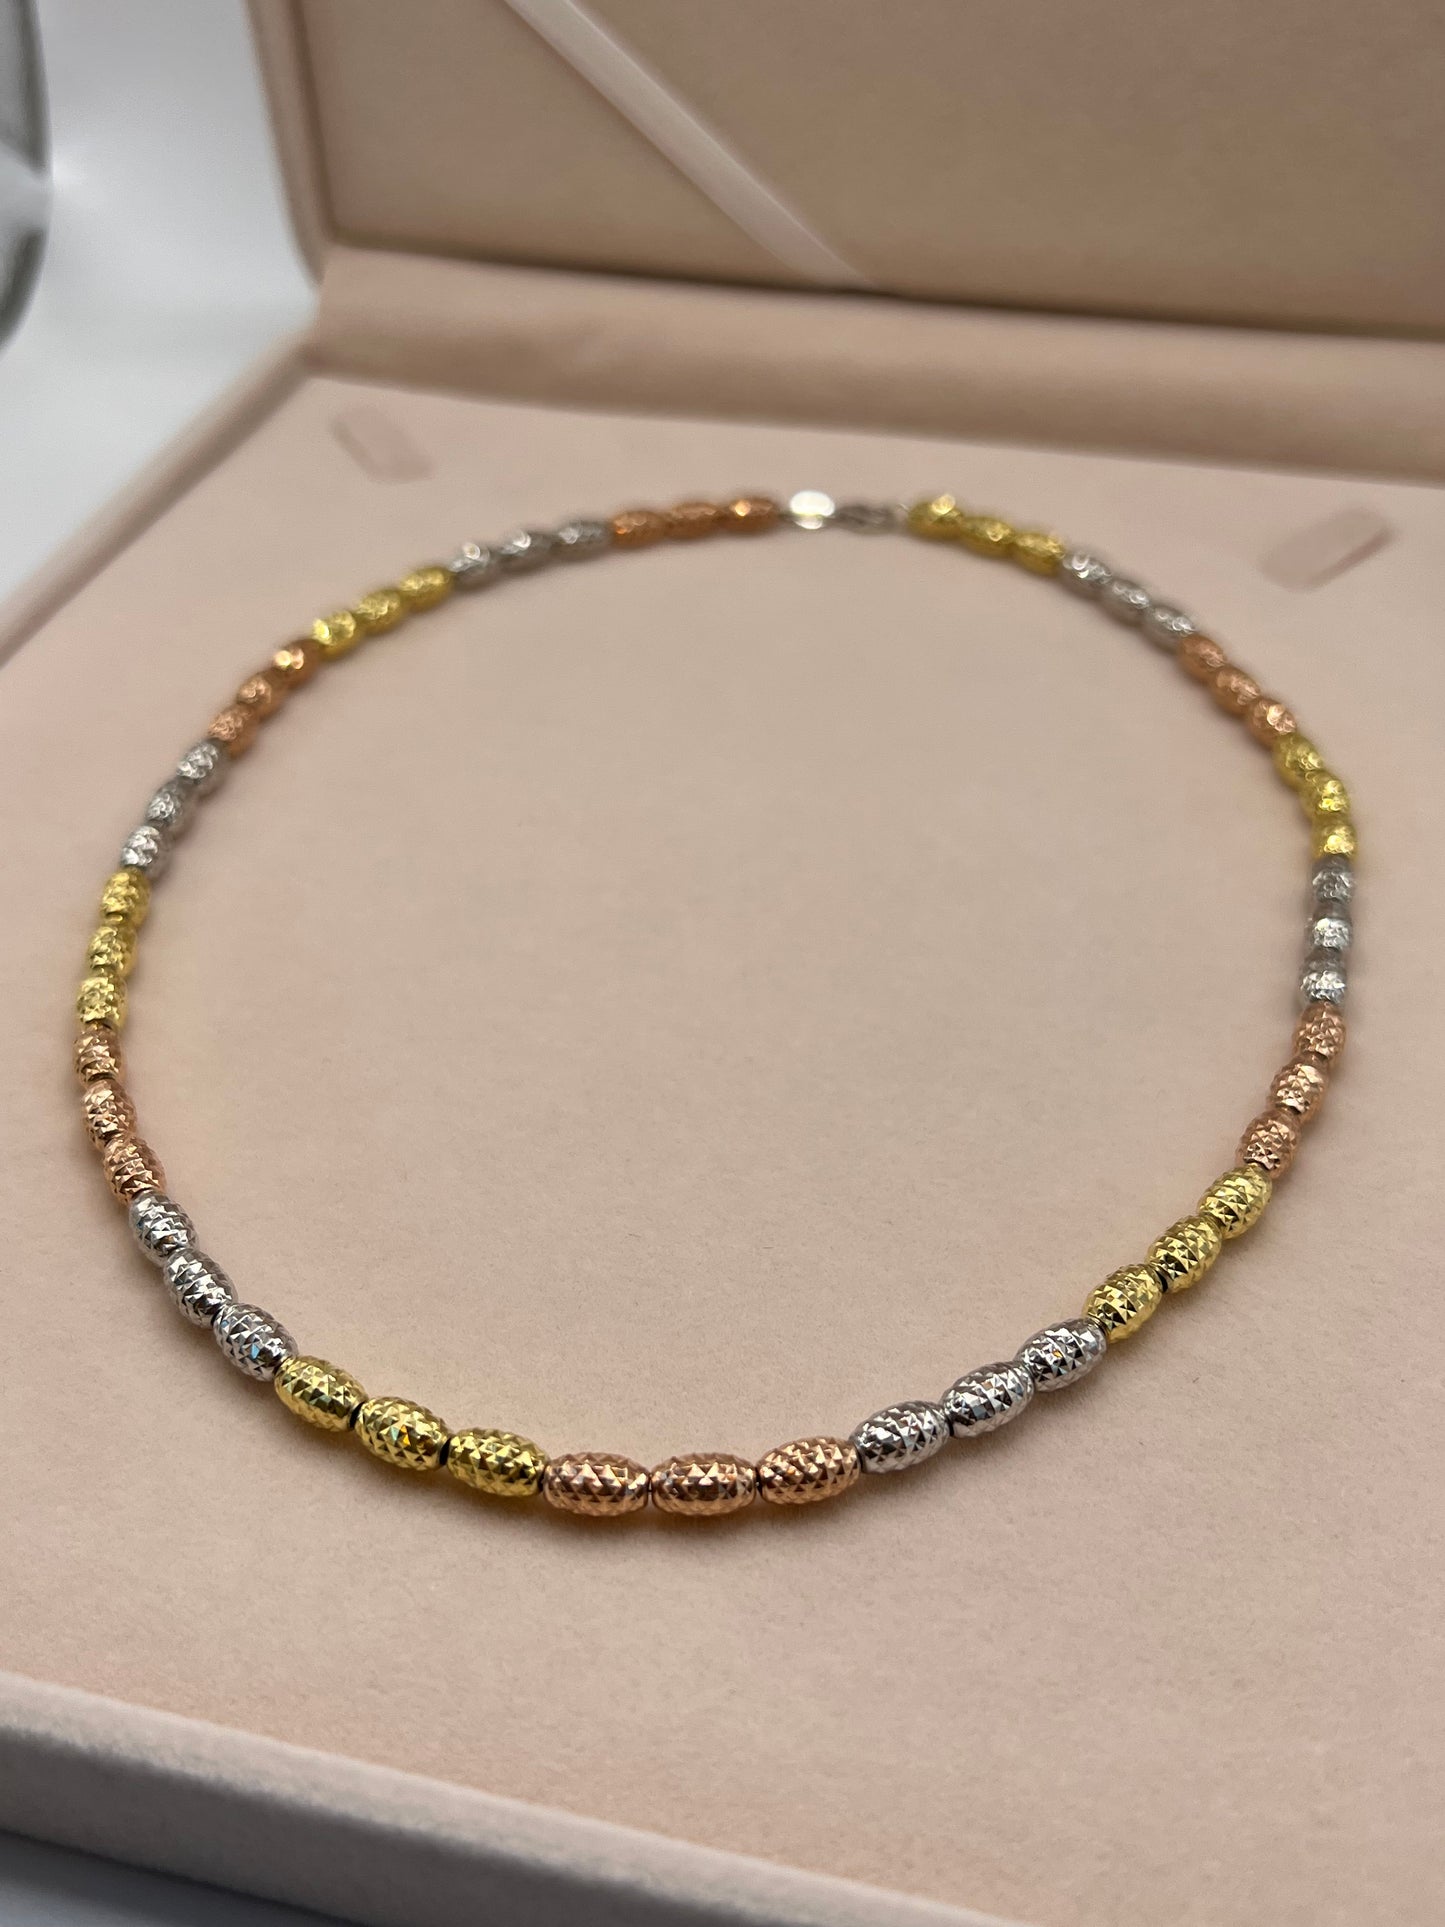 Three Tone, Rose Gold, Yellow Gold and Silver  17 1/2 Neckless 14K Gold Filled - Sterling Silver